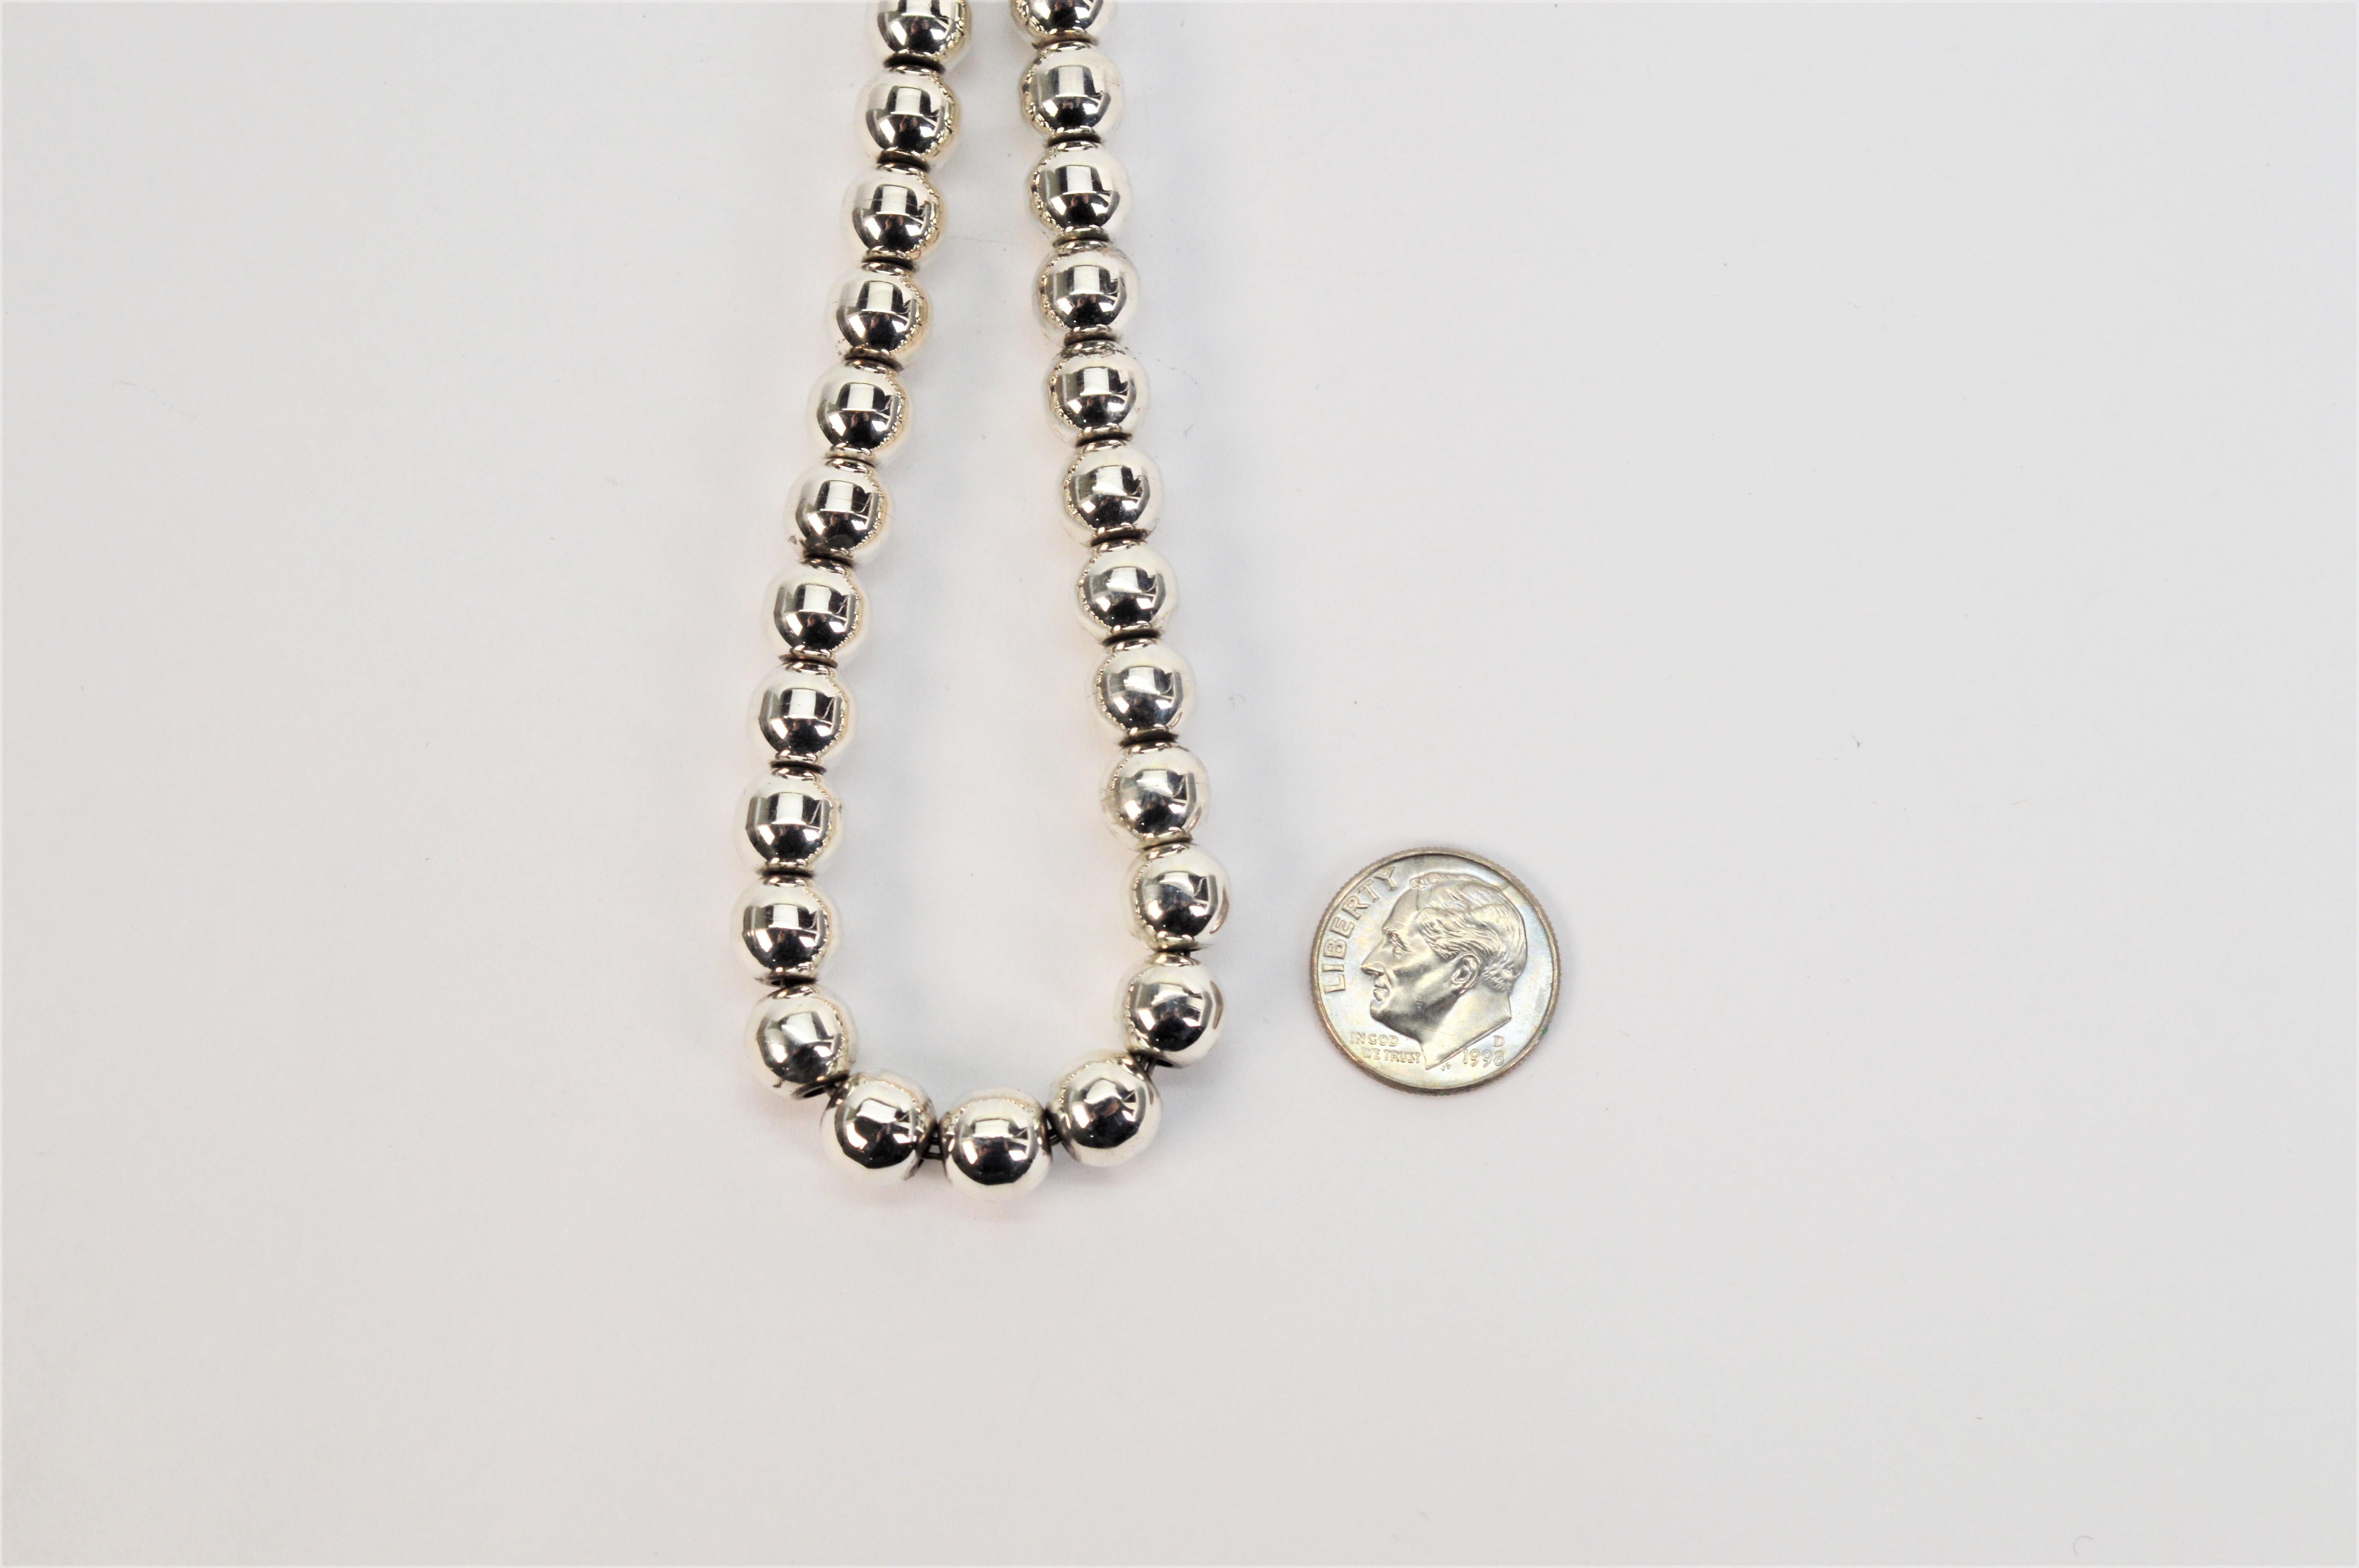 Classic Sterling Silver Beaded Necklace W Box Clasp In Excellent Condition For Sale In Mount Kisco, NY